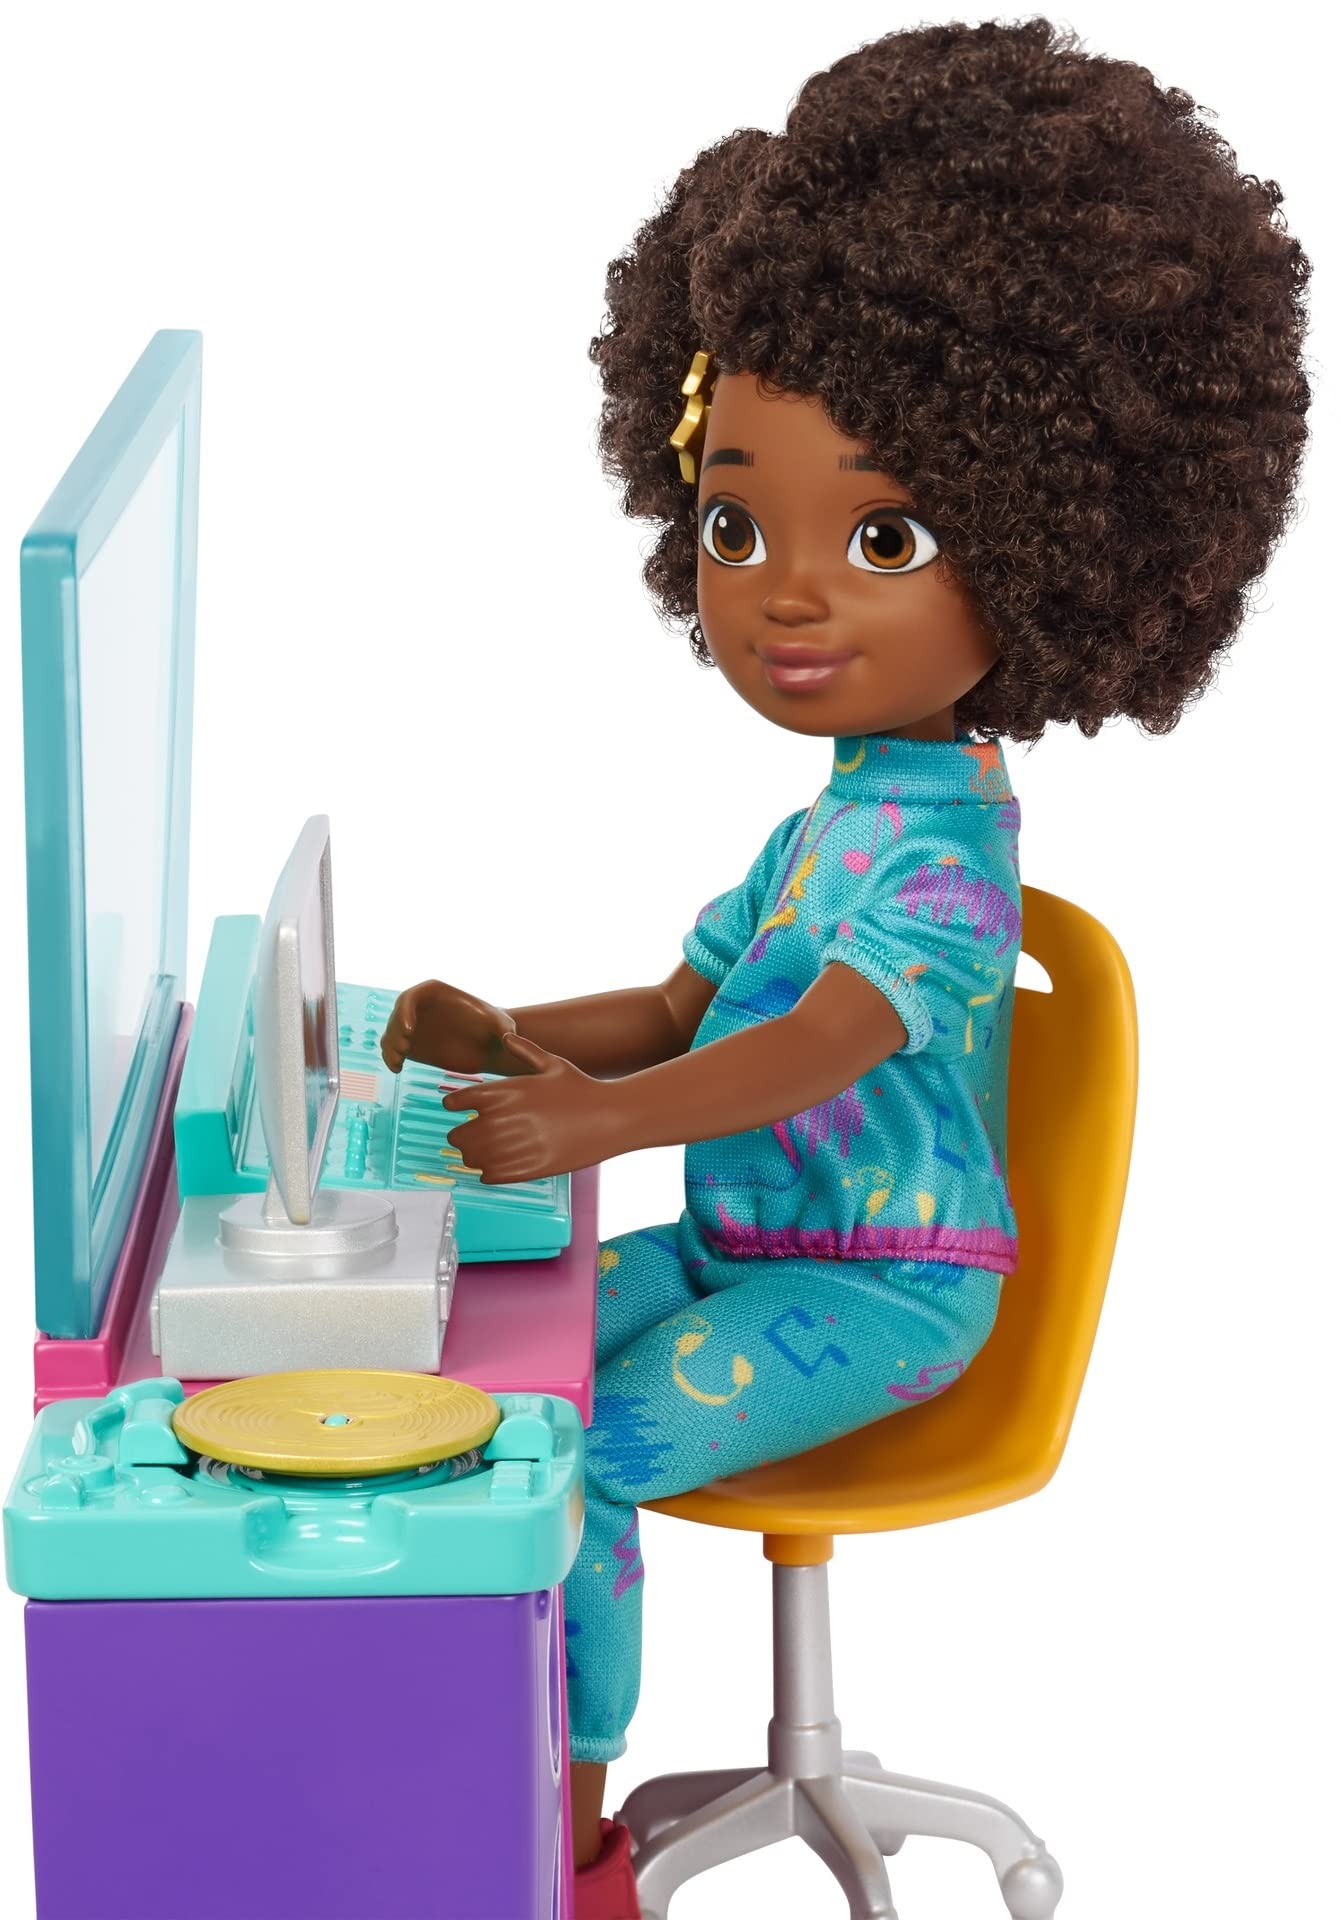 Karma's World Recording Studio Toy Playset with Karma Doll & Accessories, Includes Collectible Record